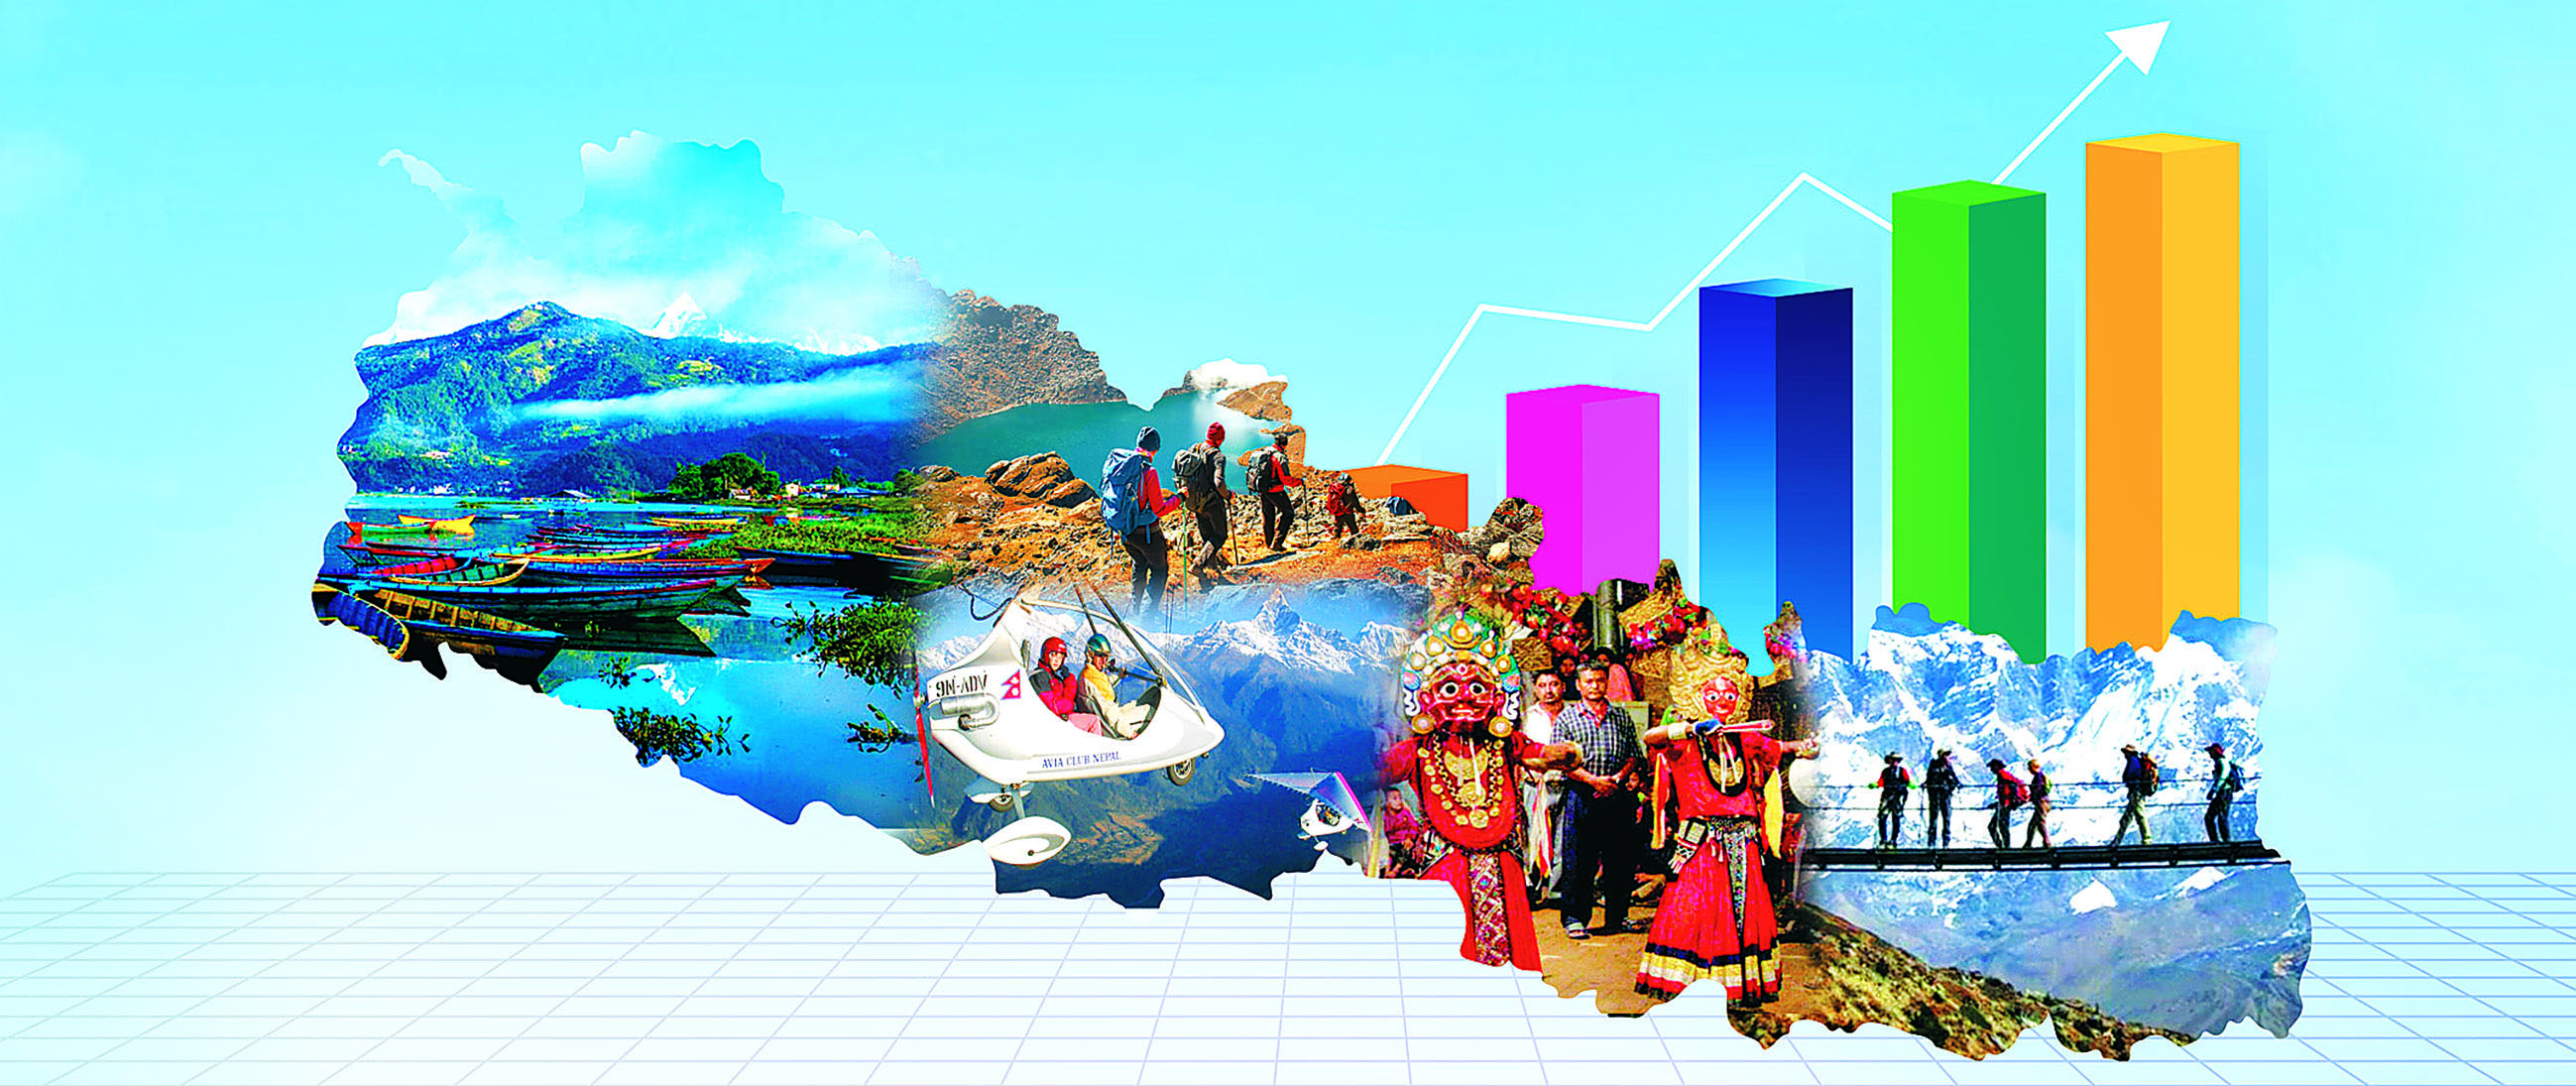 nepal tourism sector